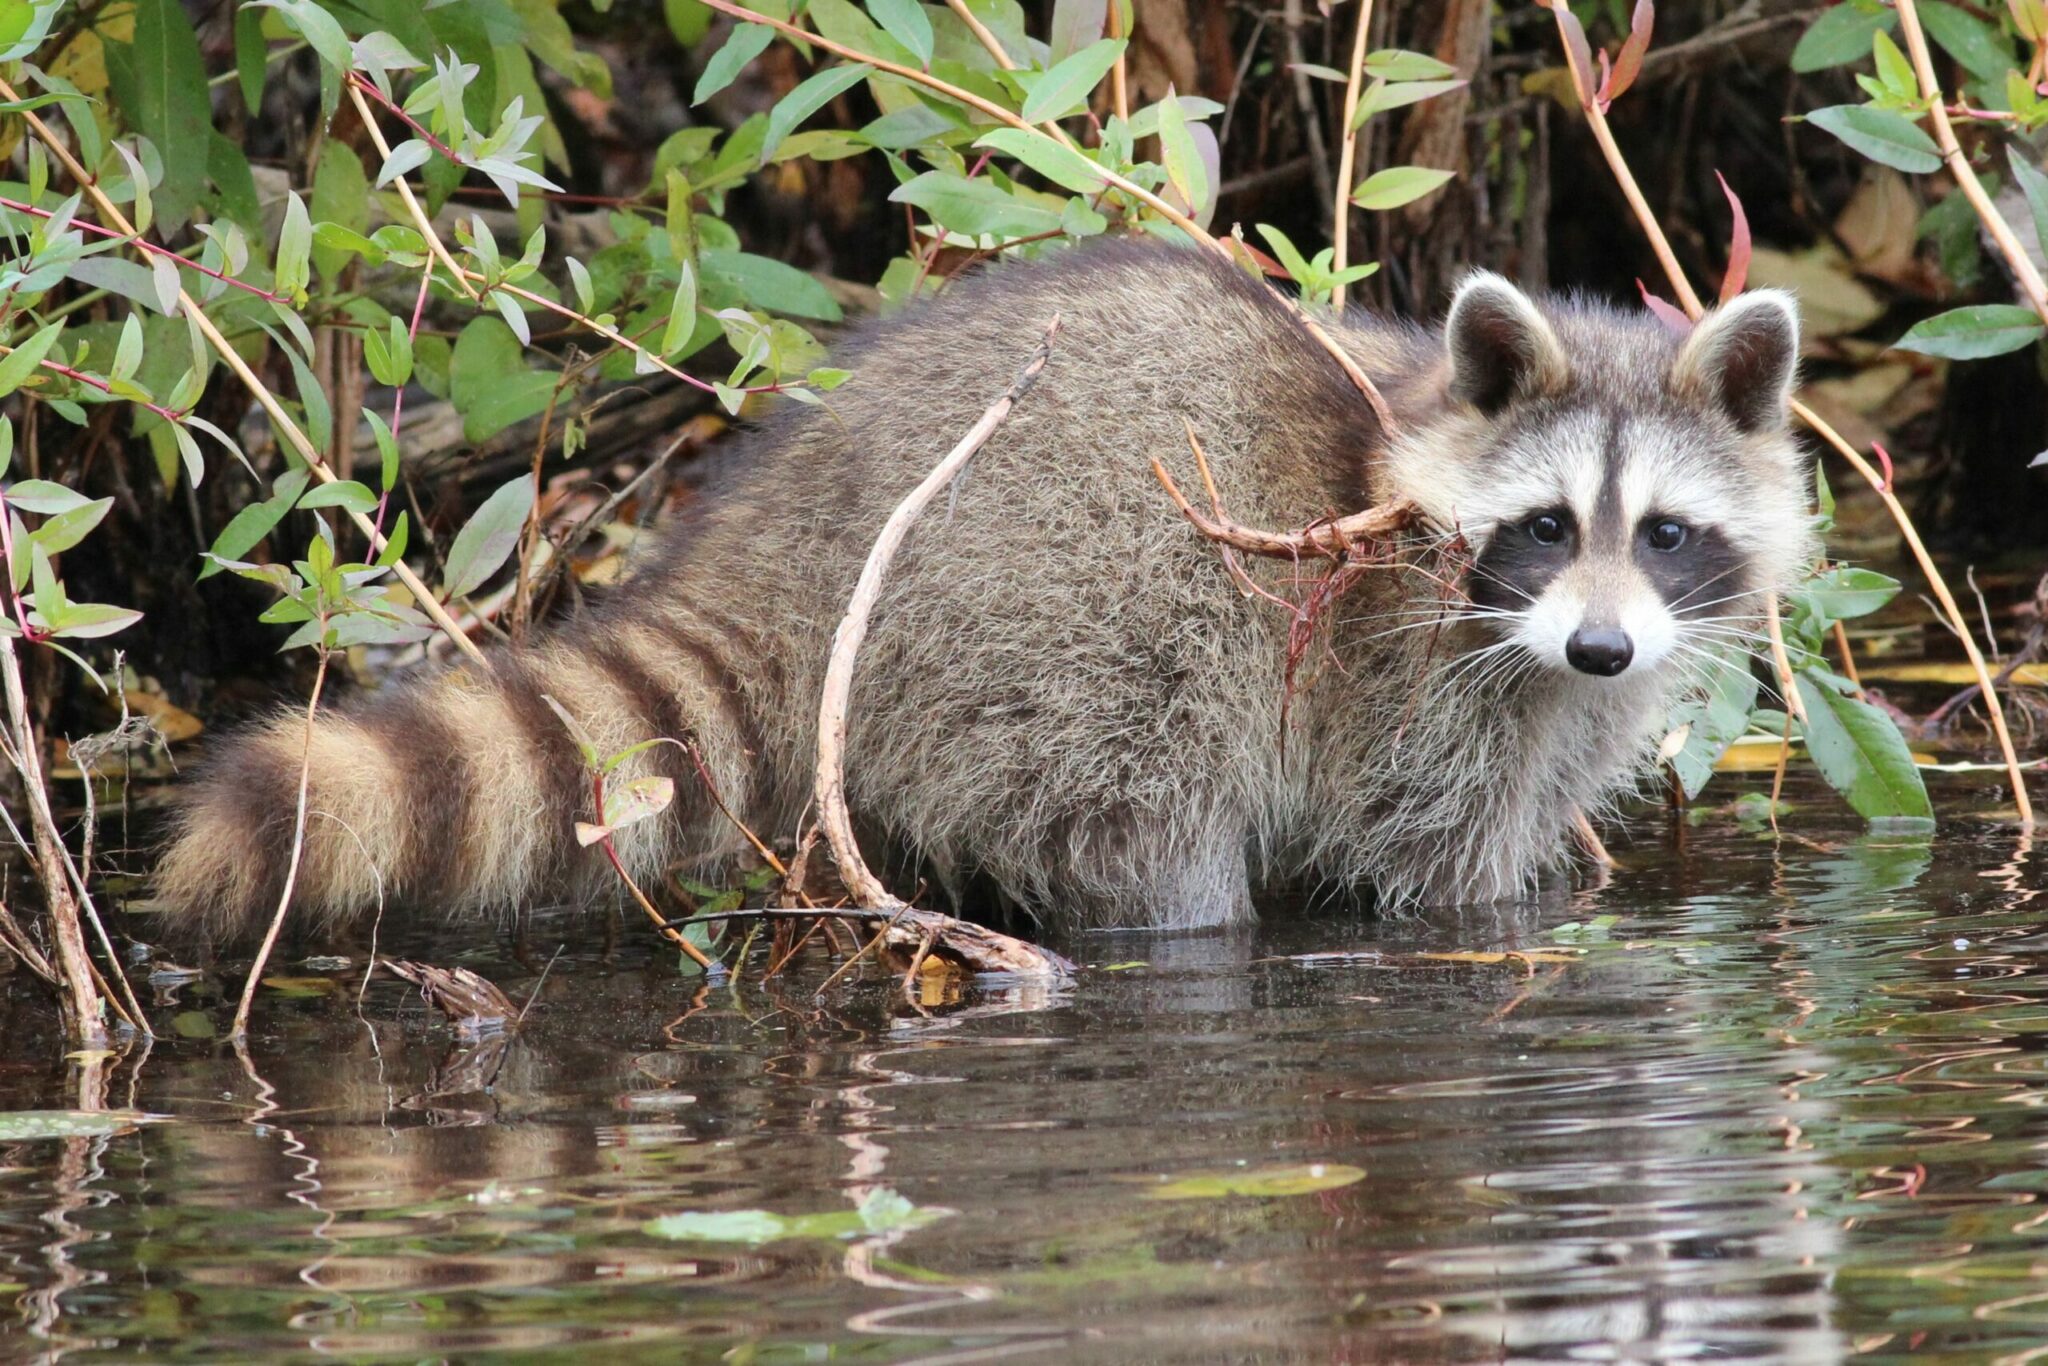 how did the raccoon get its name and where did it come from